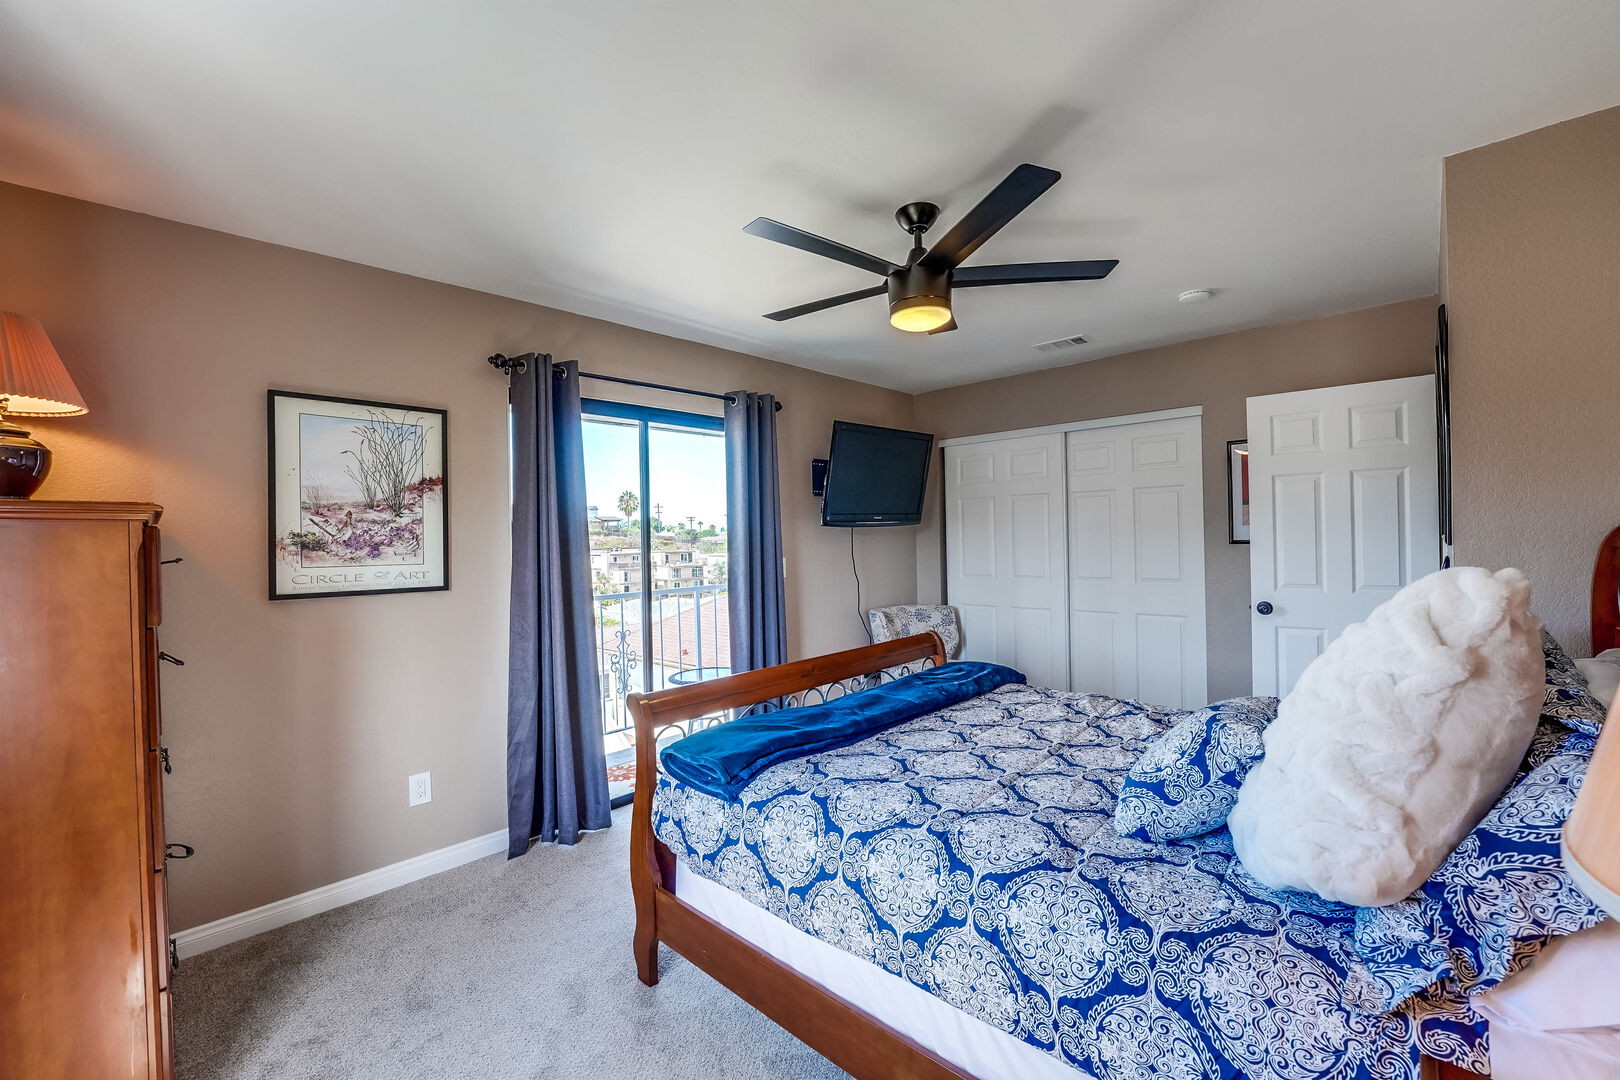 Master bedroom has a remote-controlled ceiling fan, ample storage in dresser and closet, smart TV, and small balcony with refreshing coastal breeze!